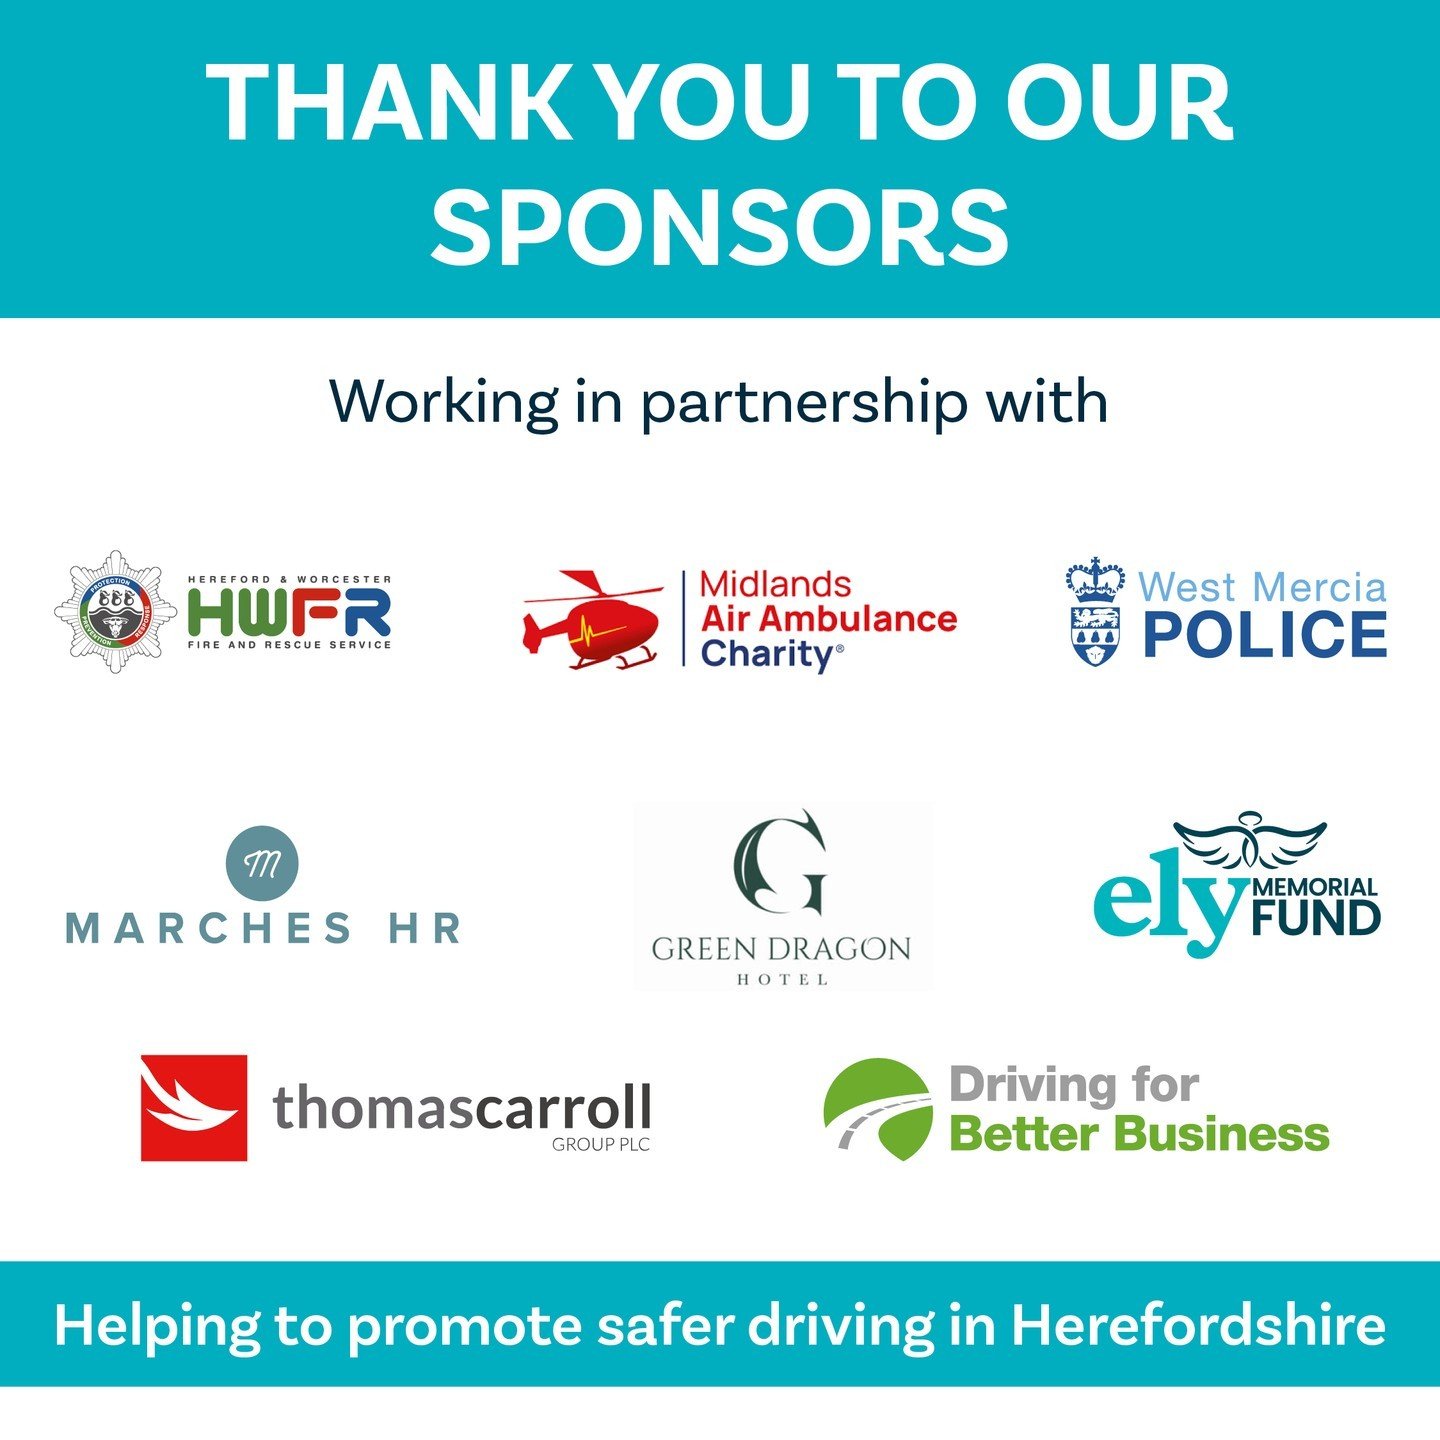 A big thank you to our sponsors for tomorrow's *FREE to attend* Employee Road Safety Event on 13th March at The Green Dragon Hotel, Hereford.

Bookings close in 6hrs, secure your space now!
https://ow.ly/YqJ550QQFSq

#drivingsafely #Resources #workpl